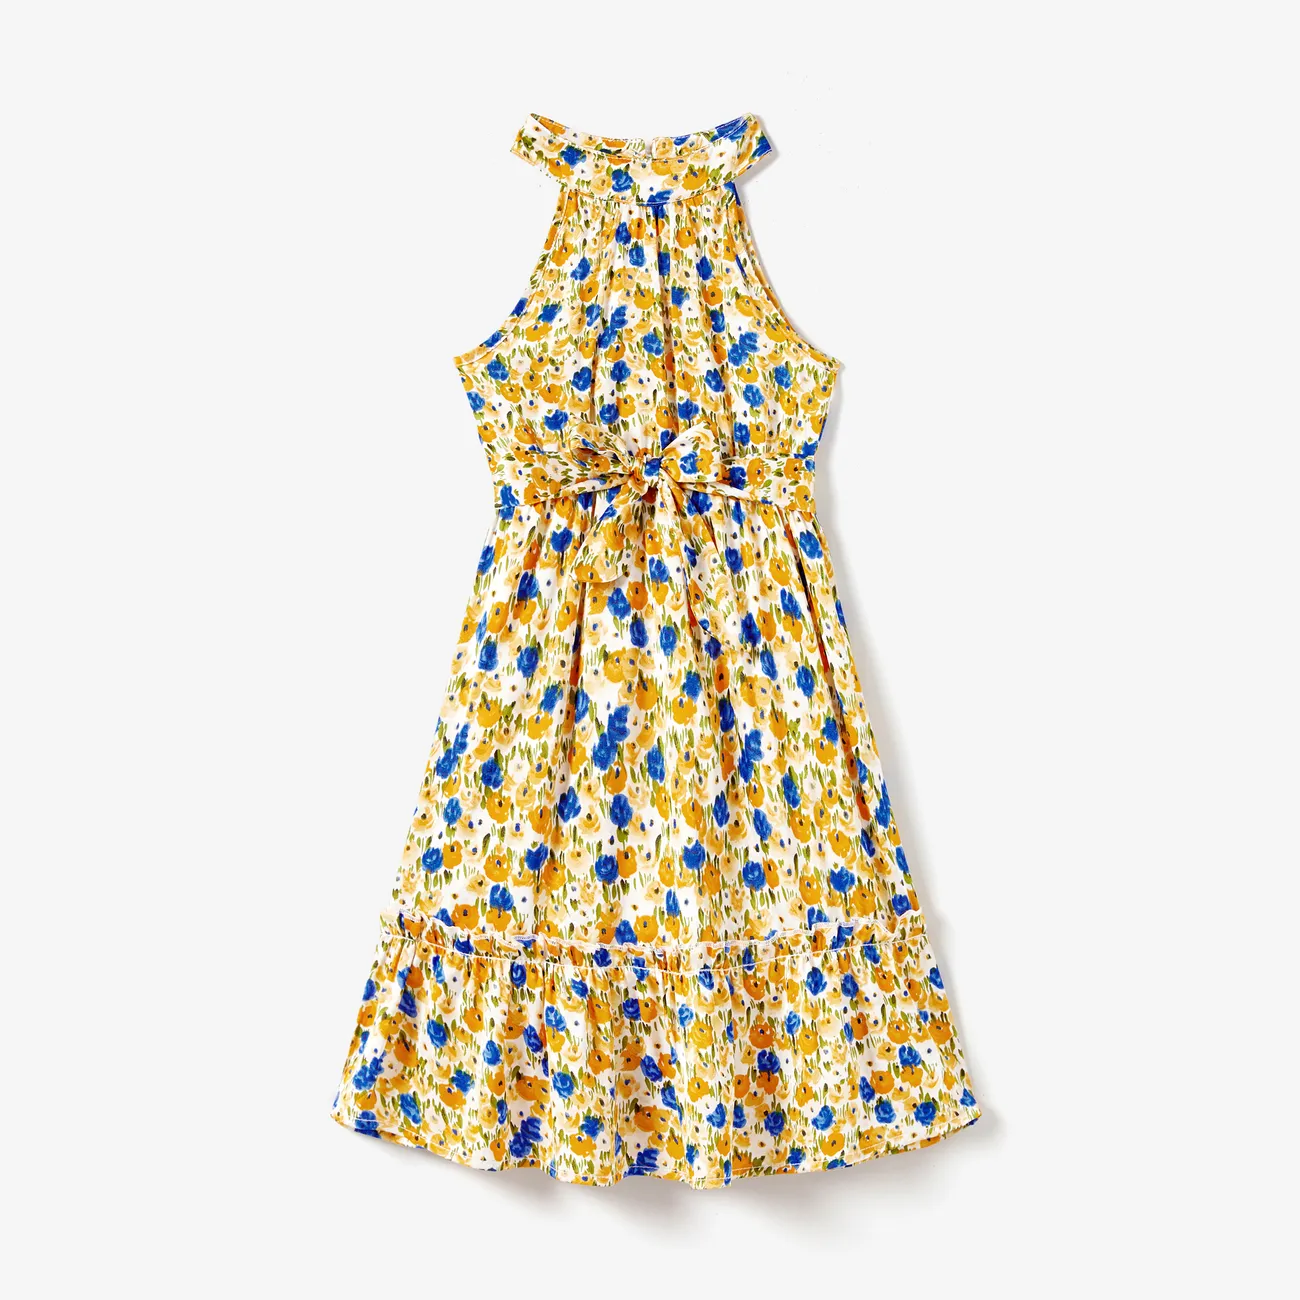 Family Matching Color Block Sunny Tee and Yellow Ditsy Floral High Neck Halter Sateen Dress Sets Yellow big image 1